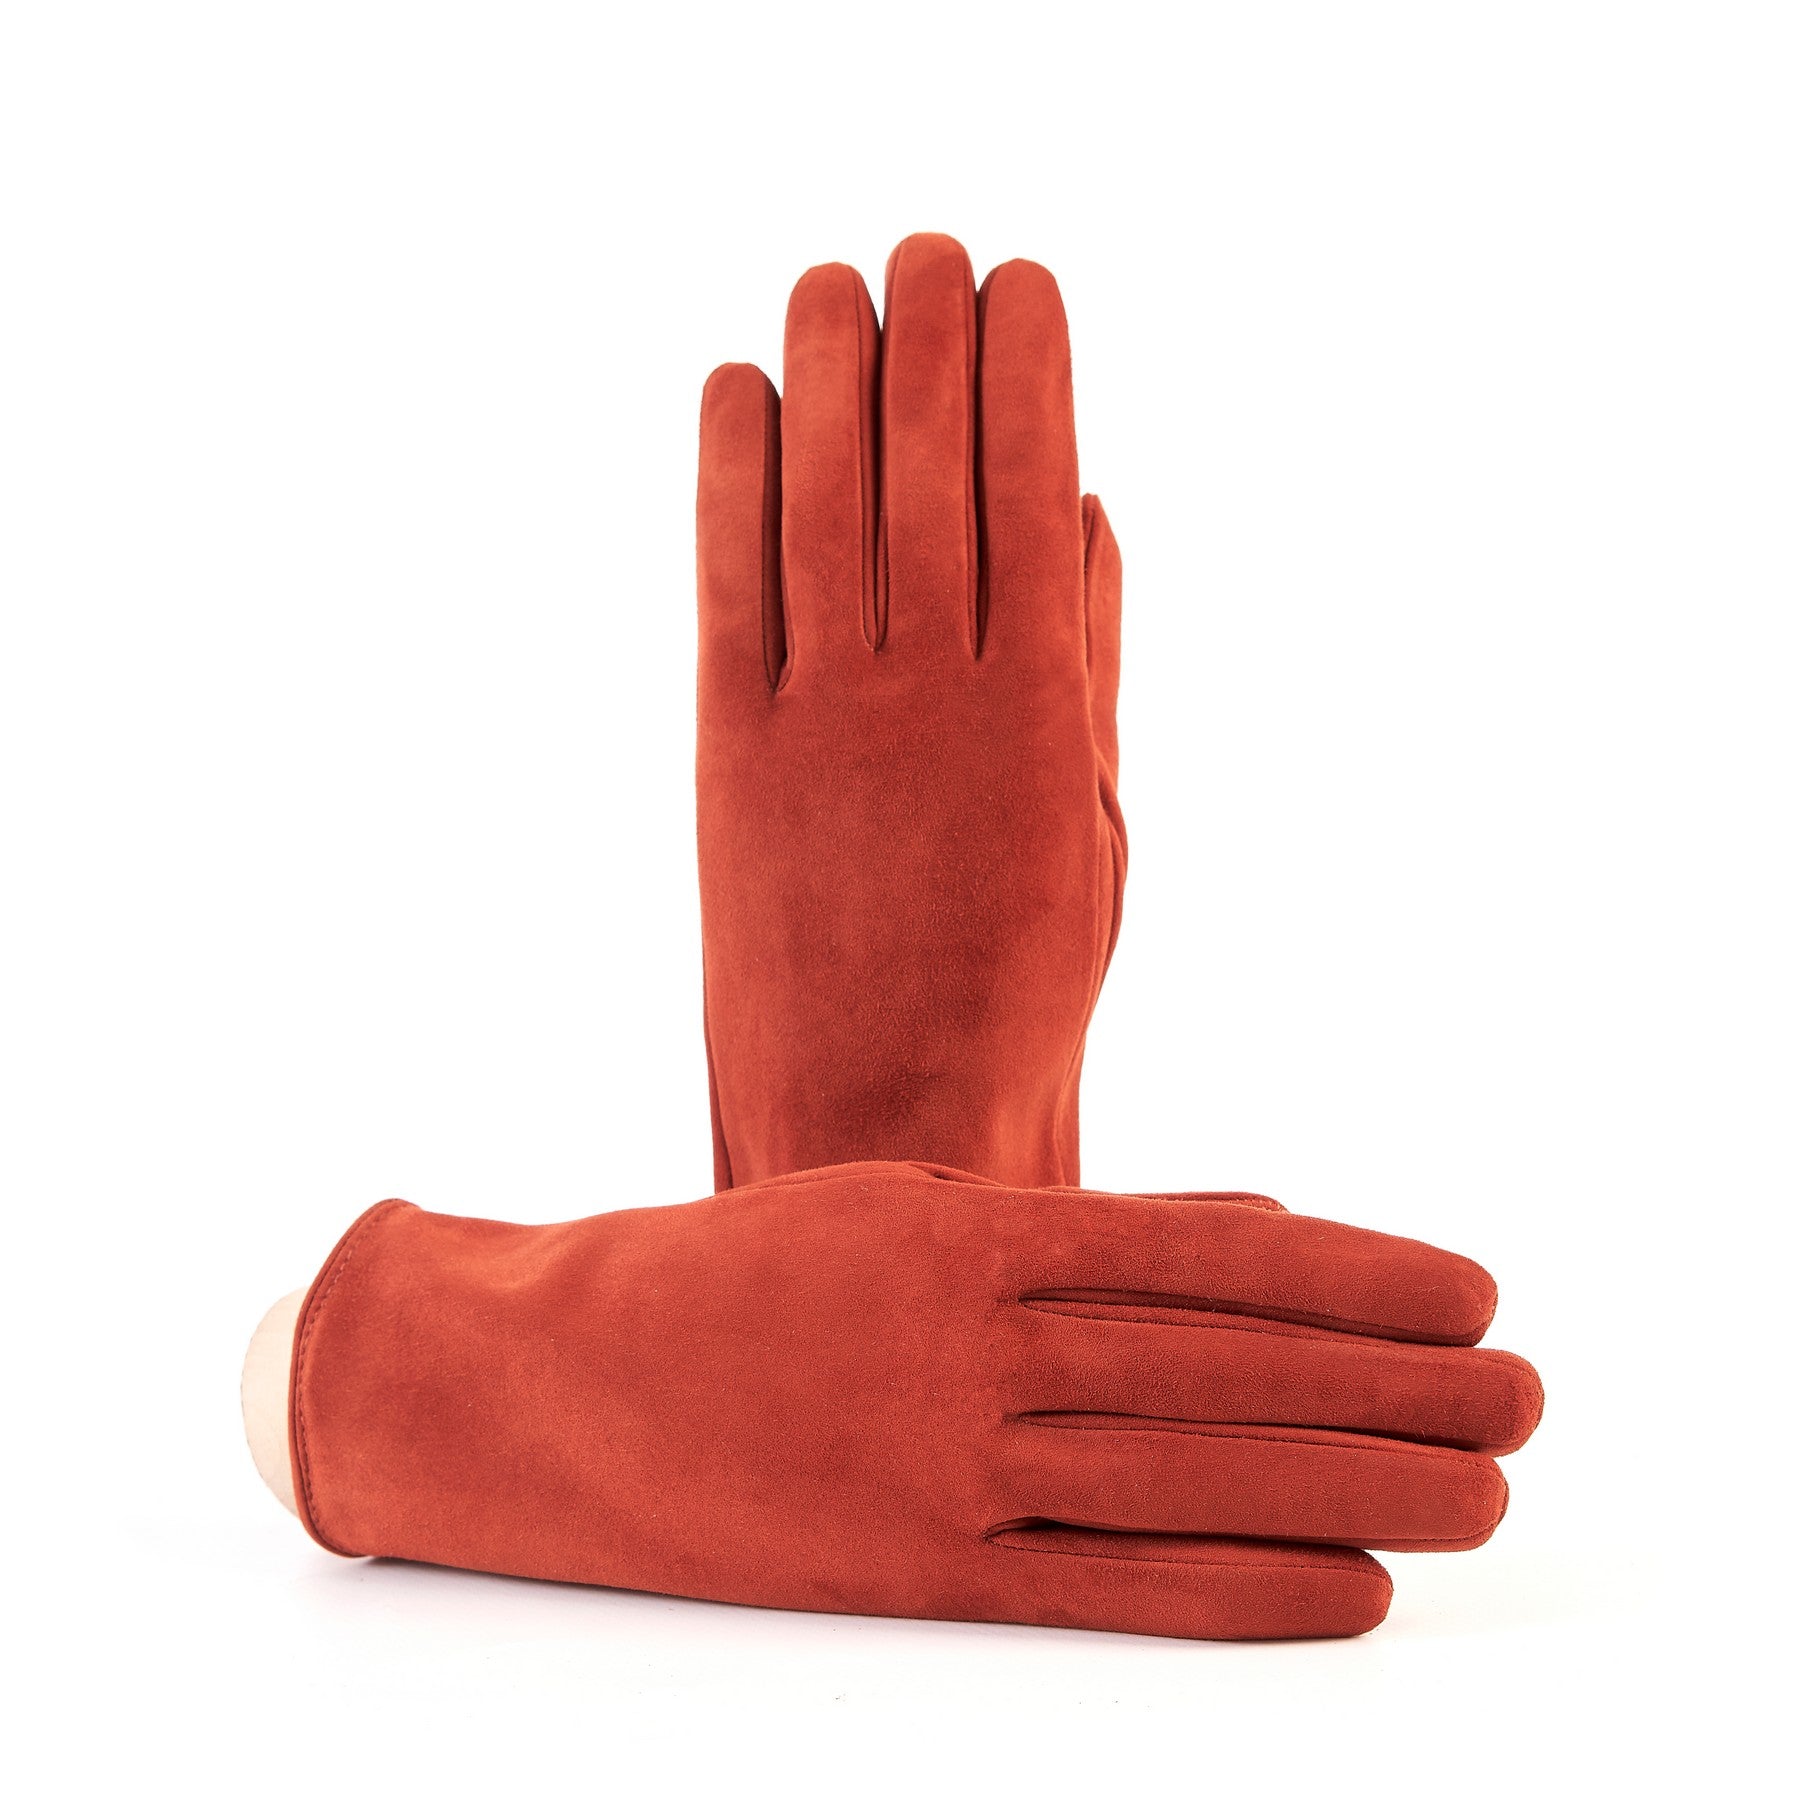 Women’s basic orange soft suede leather gloves with palm opening and mix cashmere lining